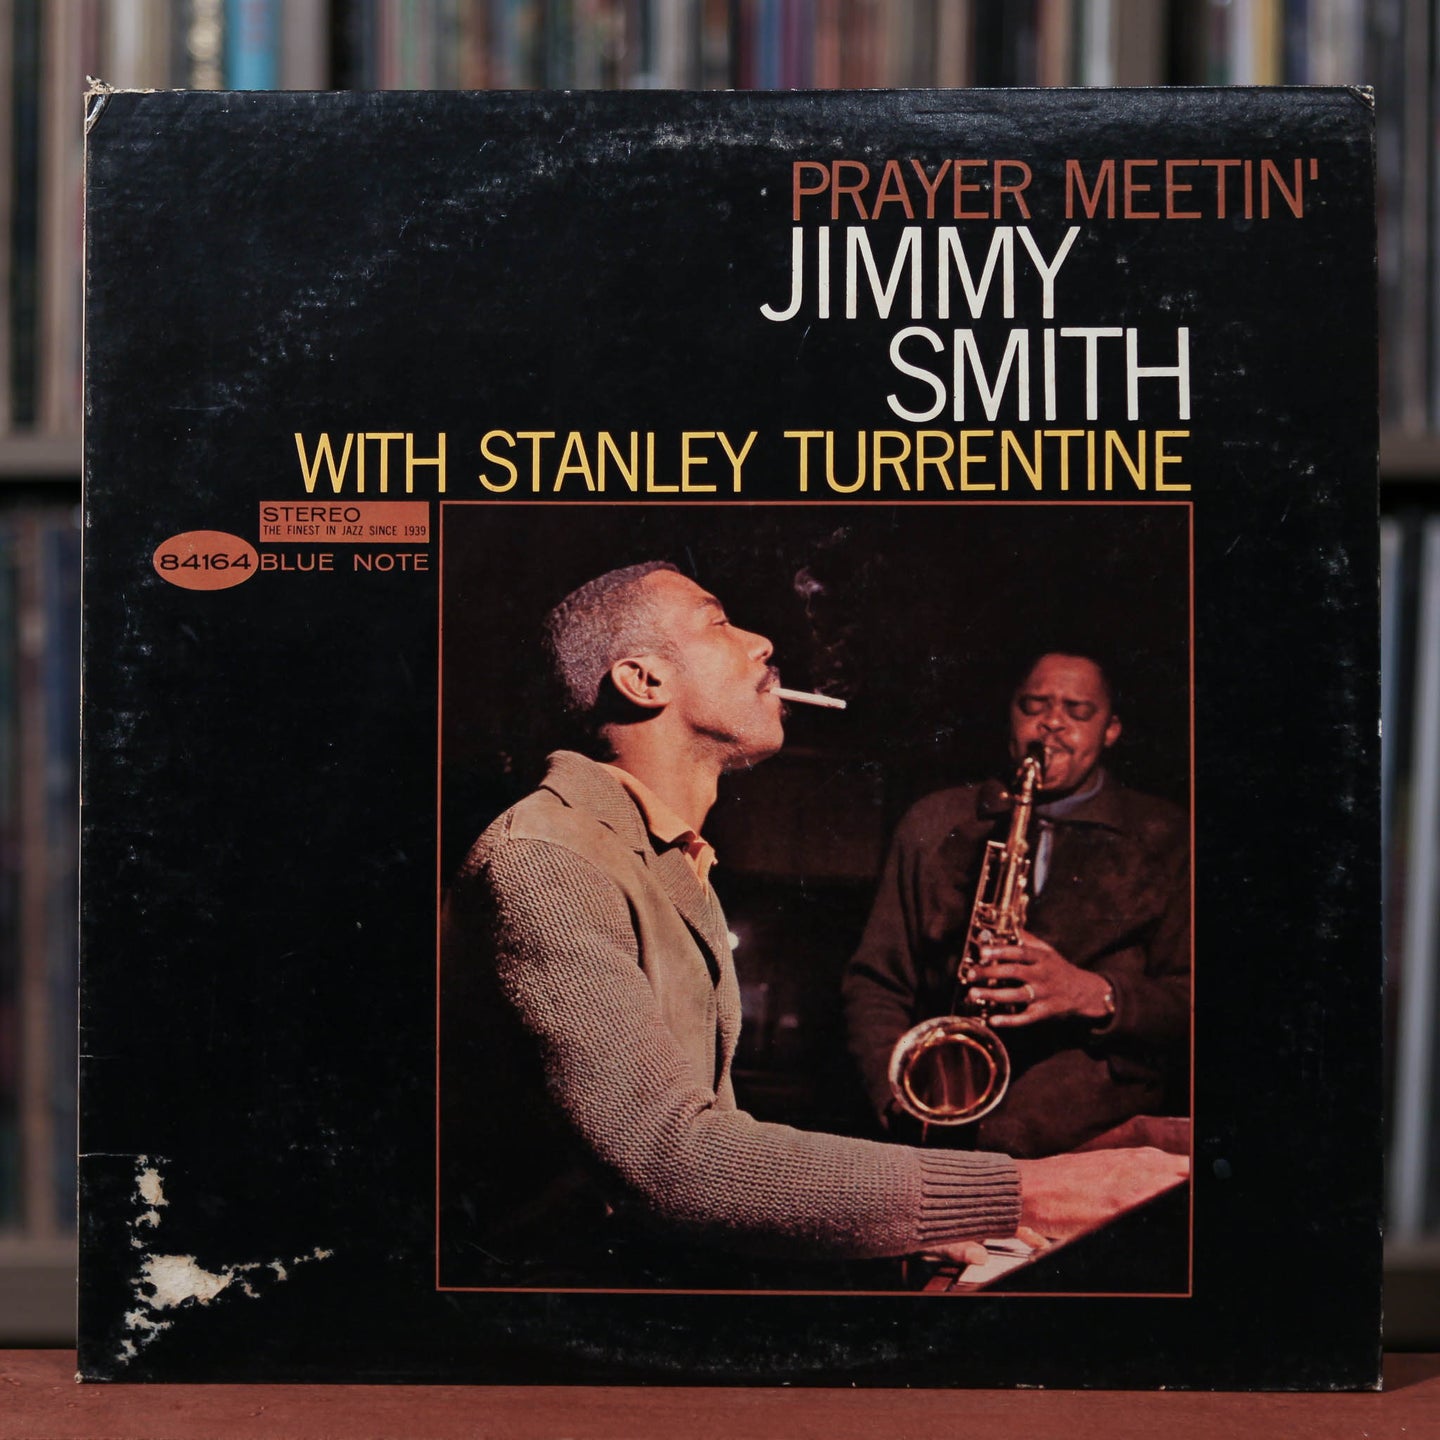 Jimmy Smith With Stanley Turrentine - Prayer Meetin' - 1964 Blue Note, VG/VG+